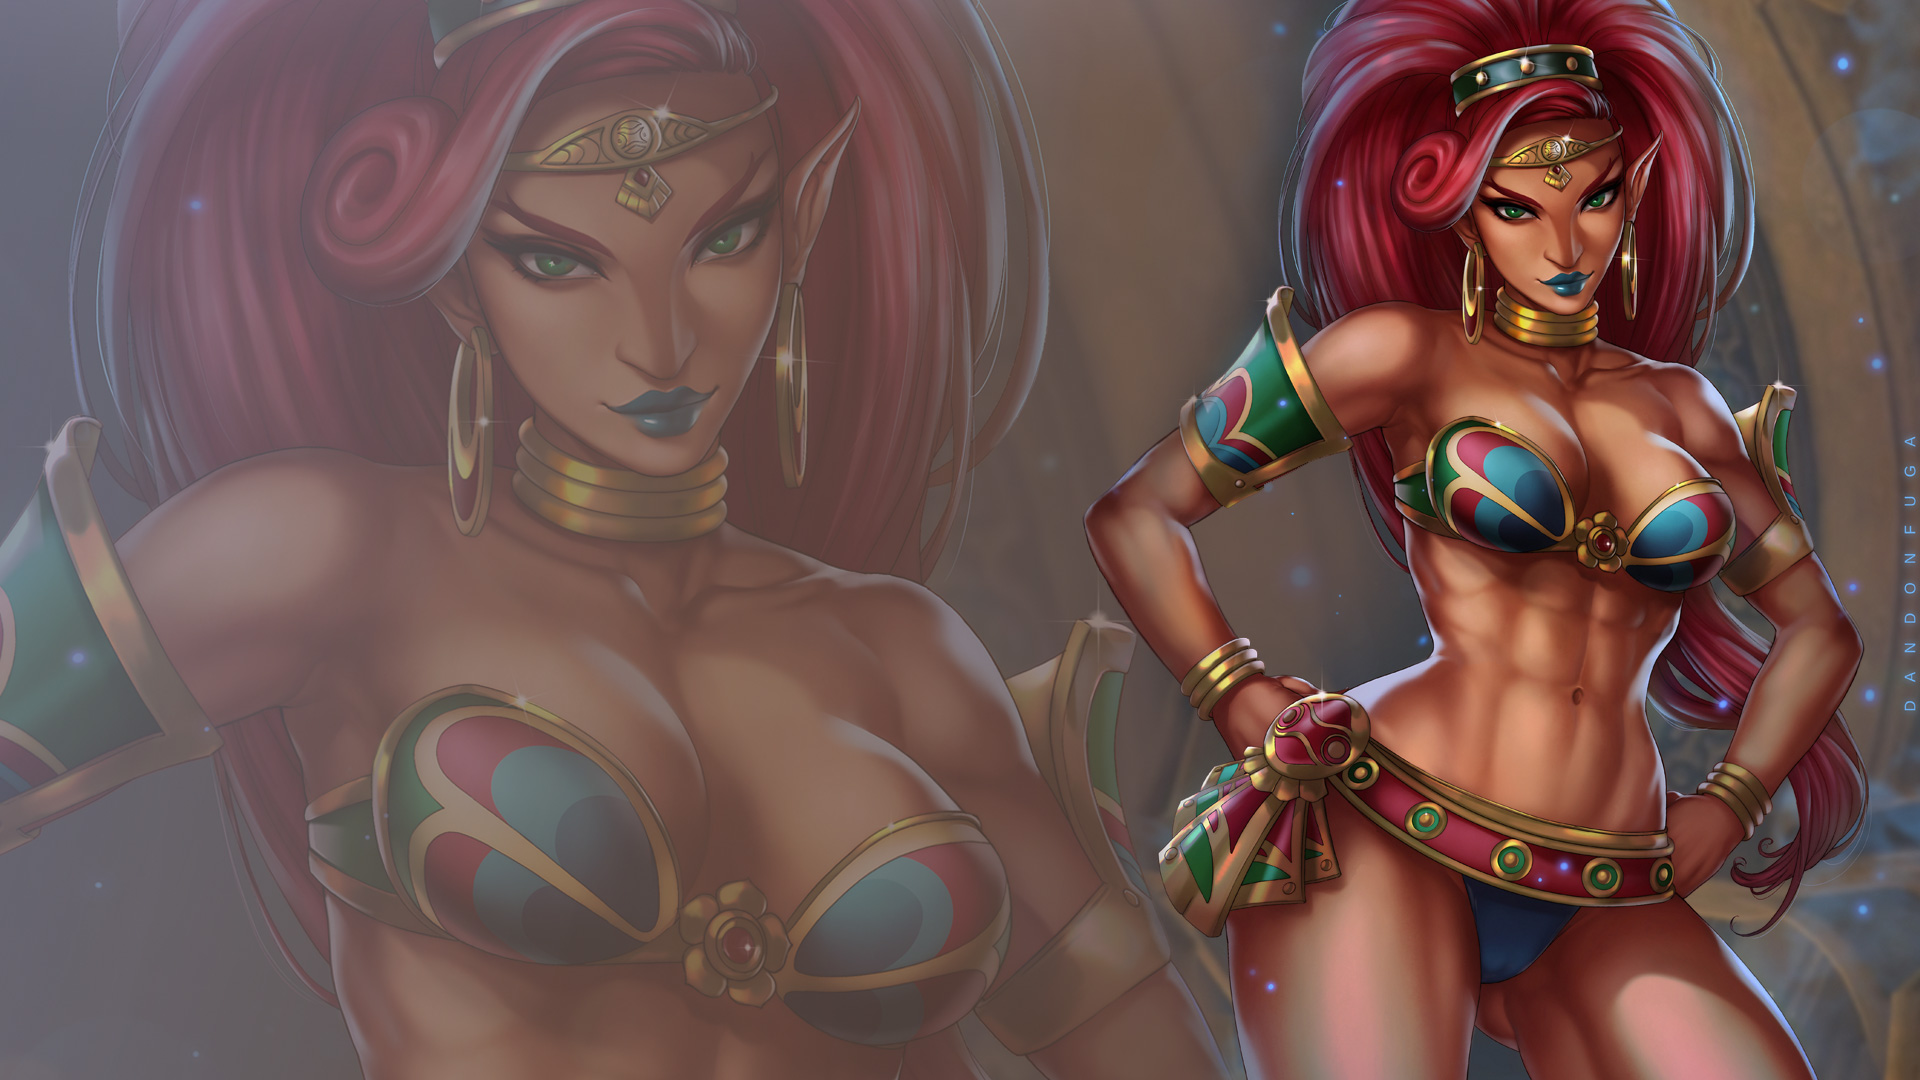 General 1920x1080 Dandonfuga Urbosa The Legend of Zelda: Breath of the Wild The Legend of Zelda green eyes video game characters pointy ears skimpy clothes big boobs belly abs belly button looking at viewer earring hoop earrings digital art